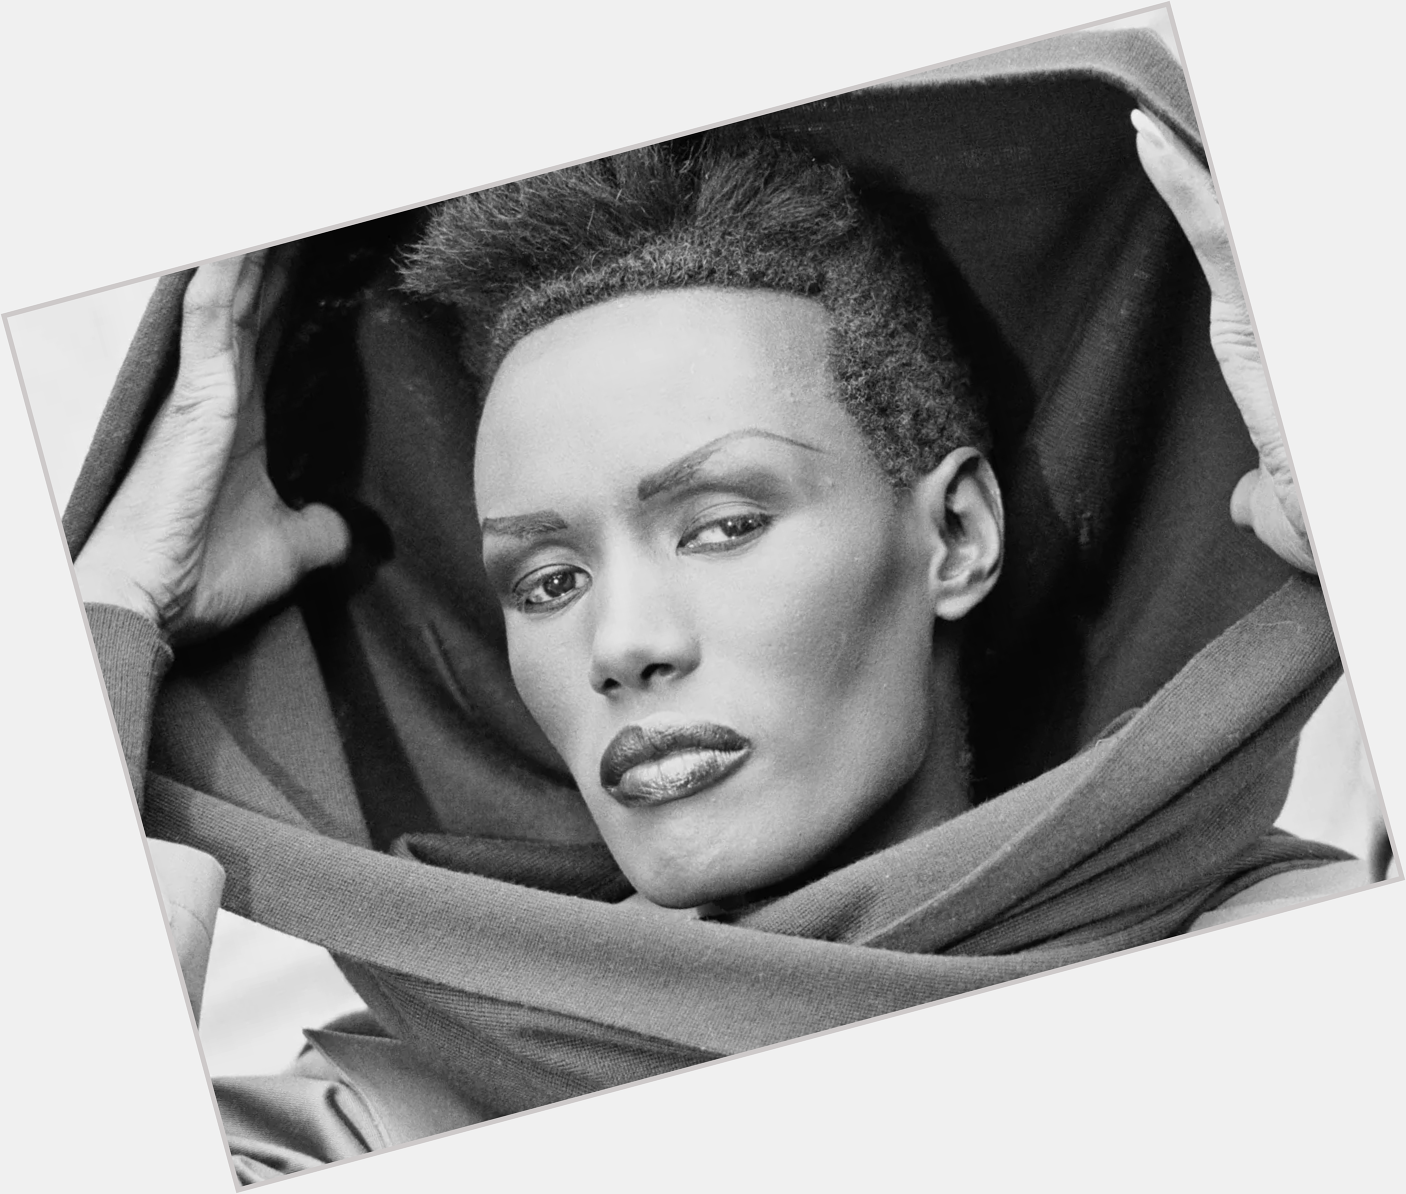 Happy birthday to by far the coolest person to have ever lived in my hometown, Grace Jones. 